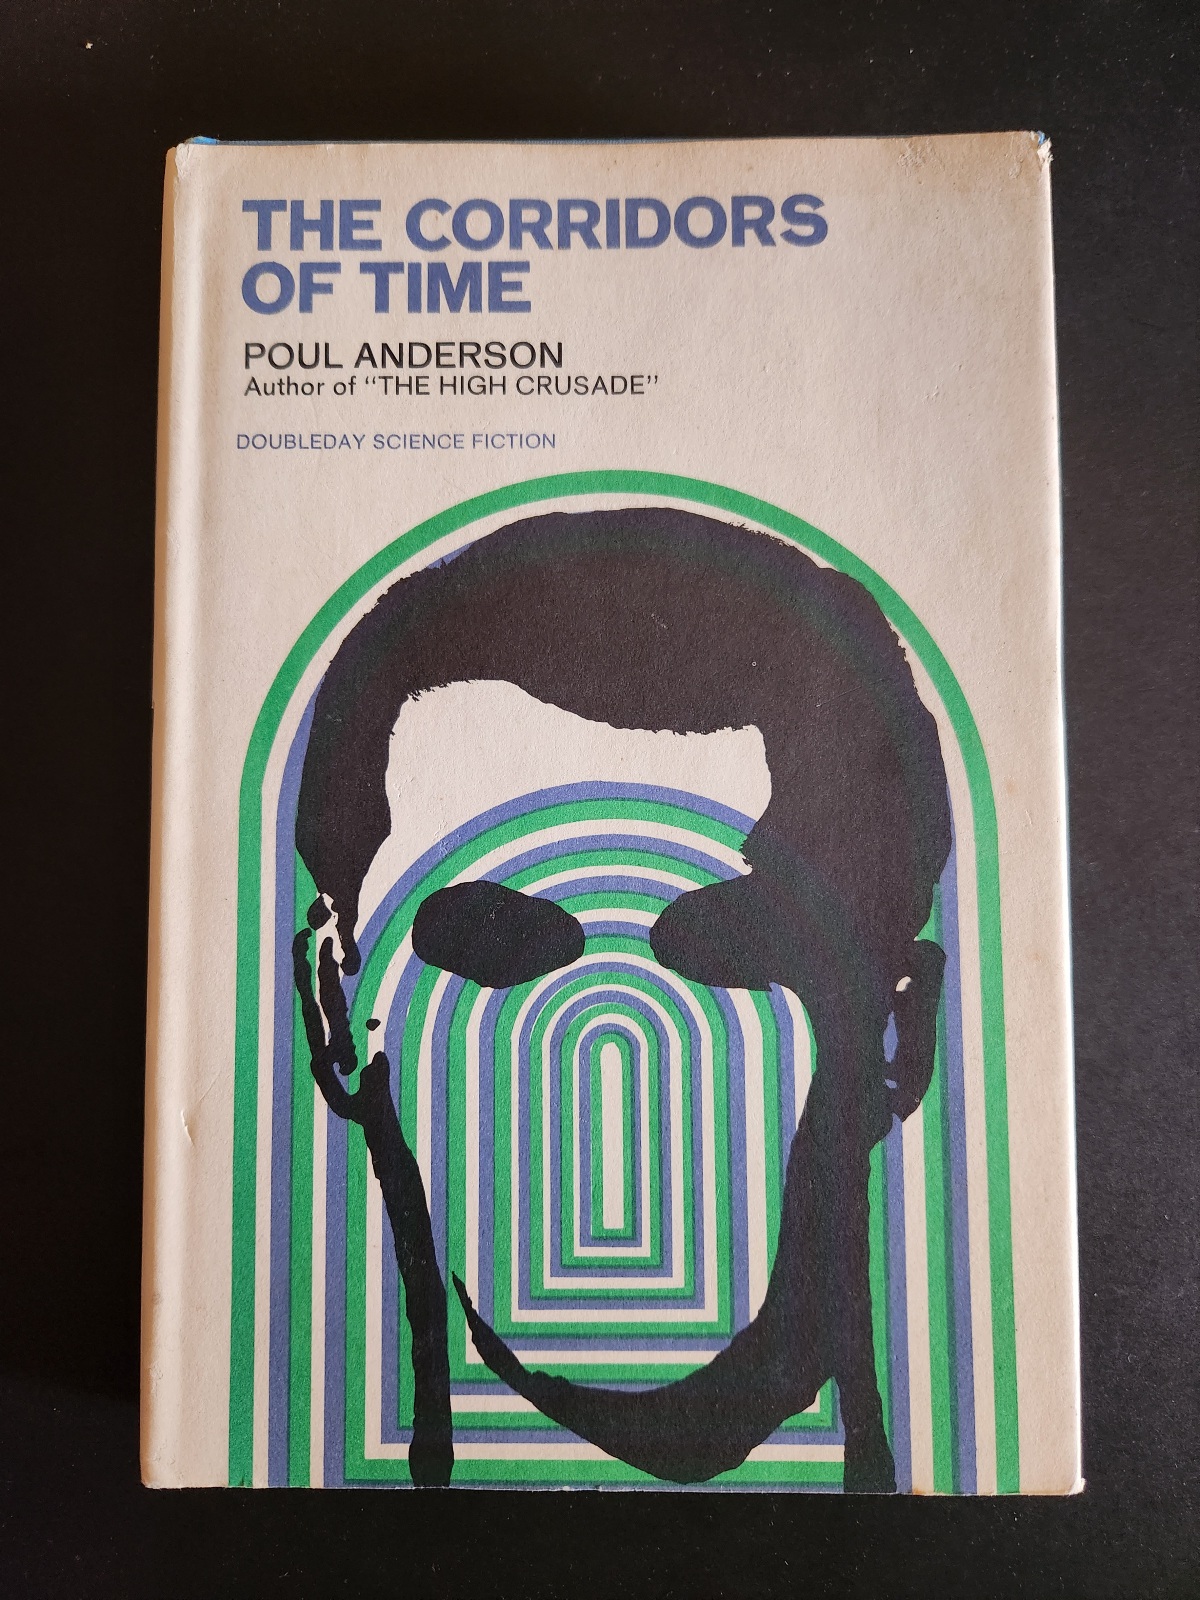 The Corridors of Time by Poul Anderson 1965 Doubleday Science Fiction Book Club Edition